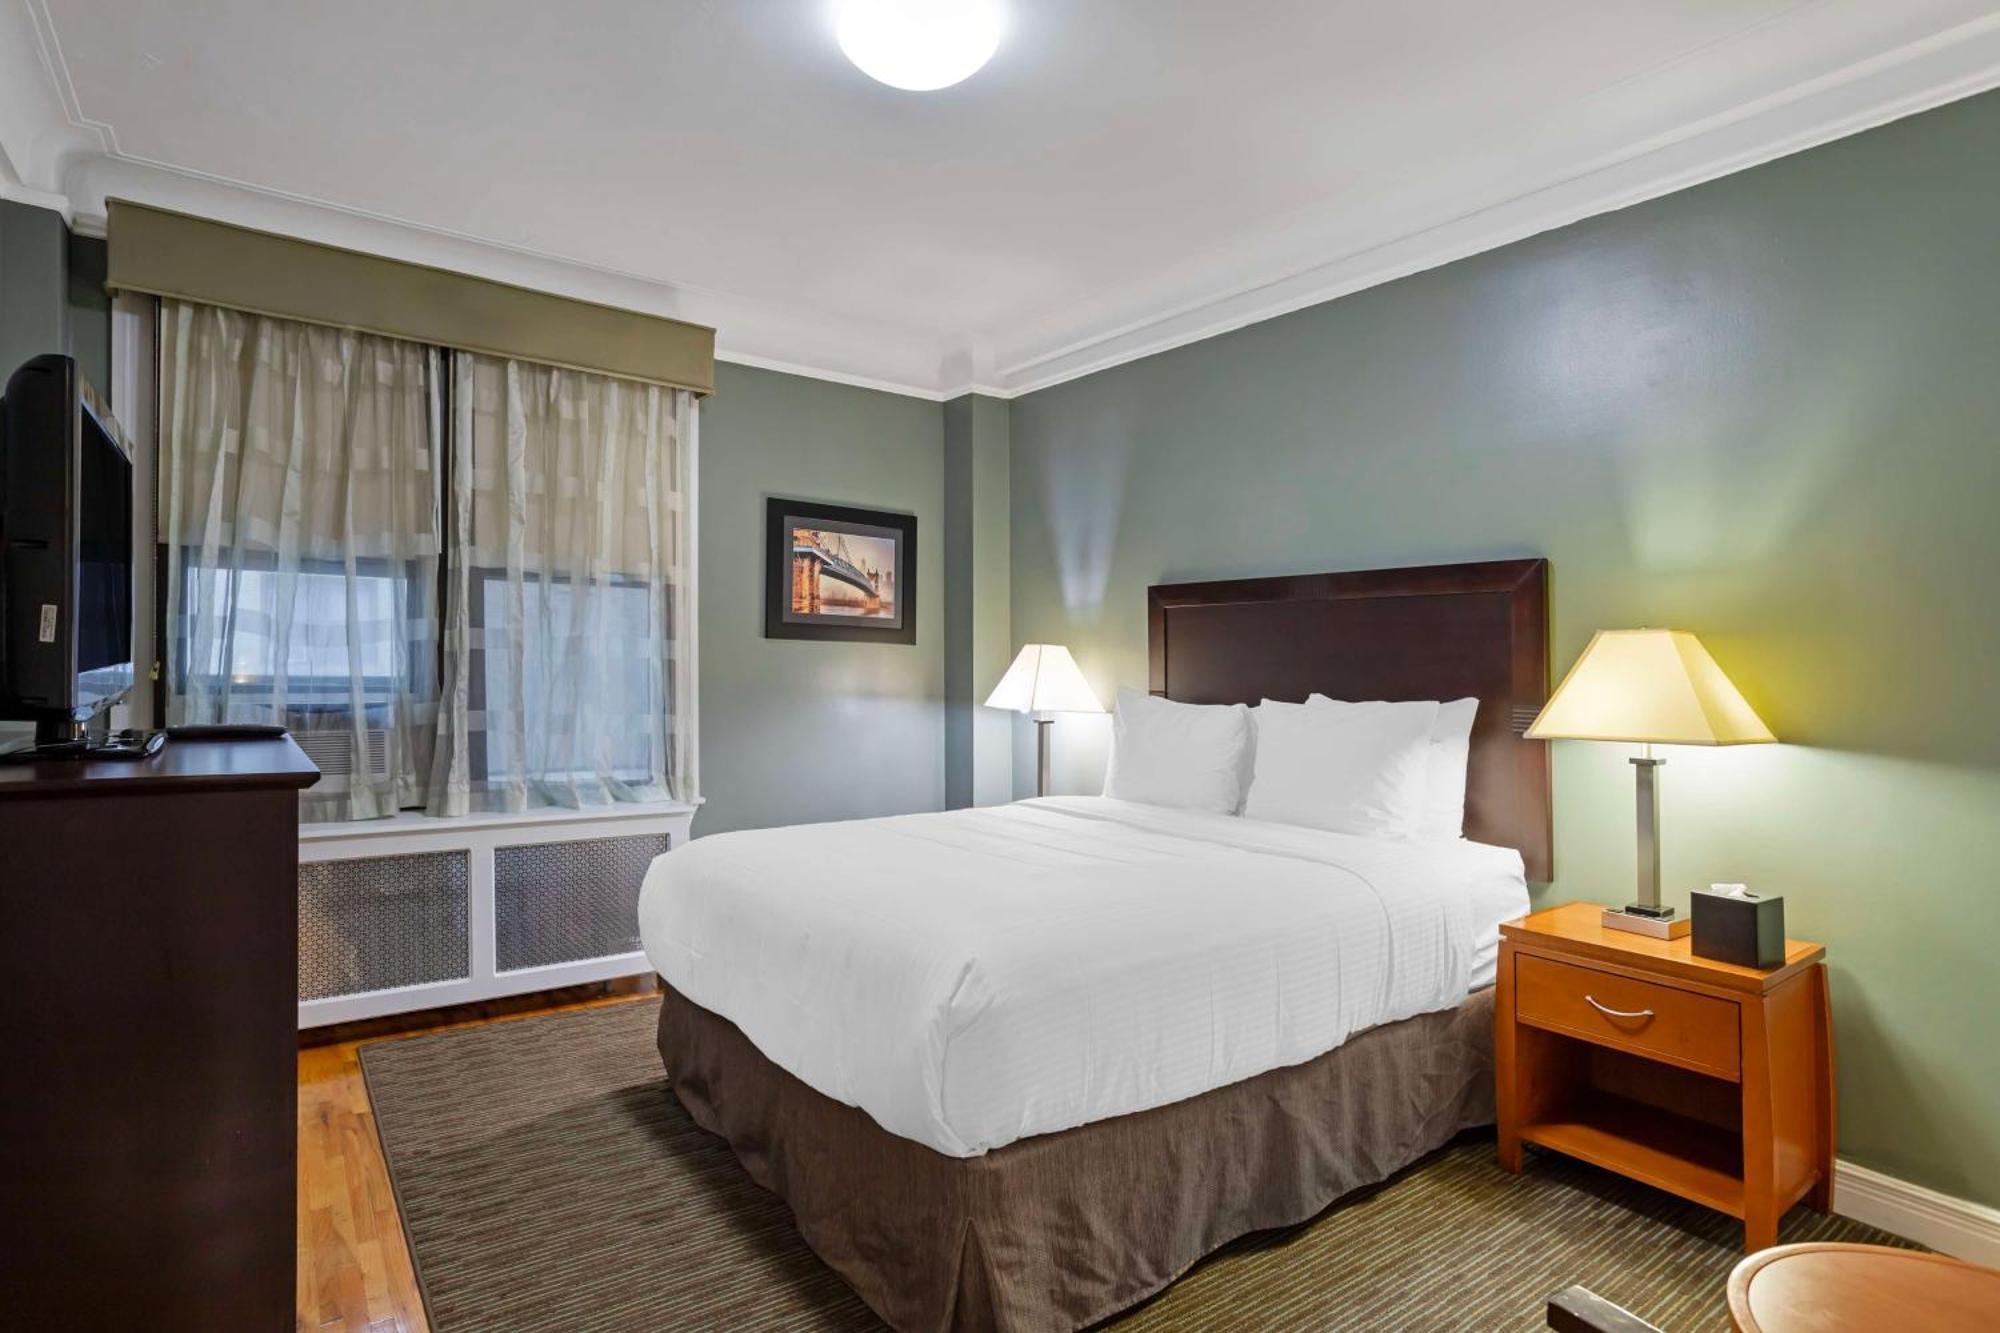 Best Western Plus Hospitality House Suites New York Exterior foto